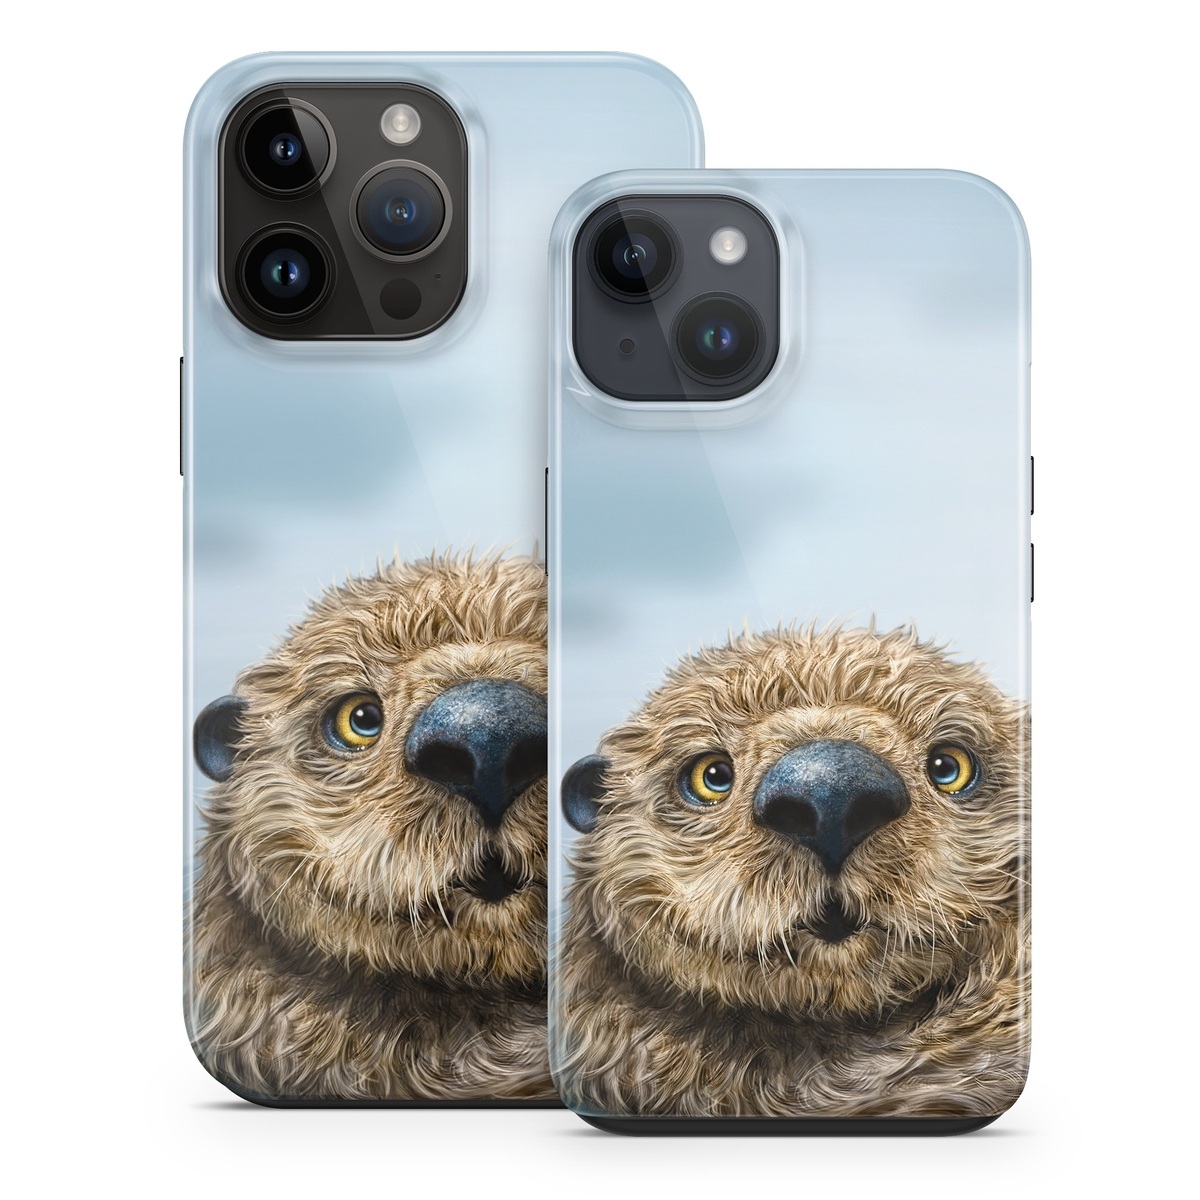  design of Mammal, Vertebrate, Otter, Sea otter, North american river otter, Marine mammal, Terrestrial animal, Mustelidae, Snout, Organism, with gray, black, blue, green, red colors